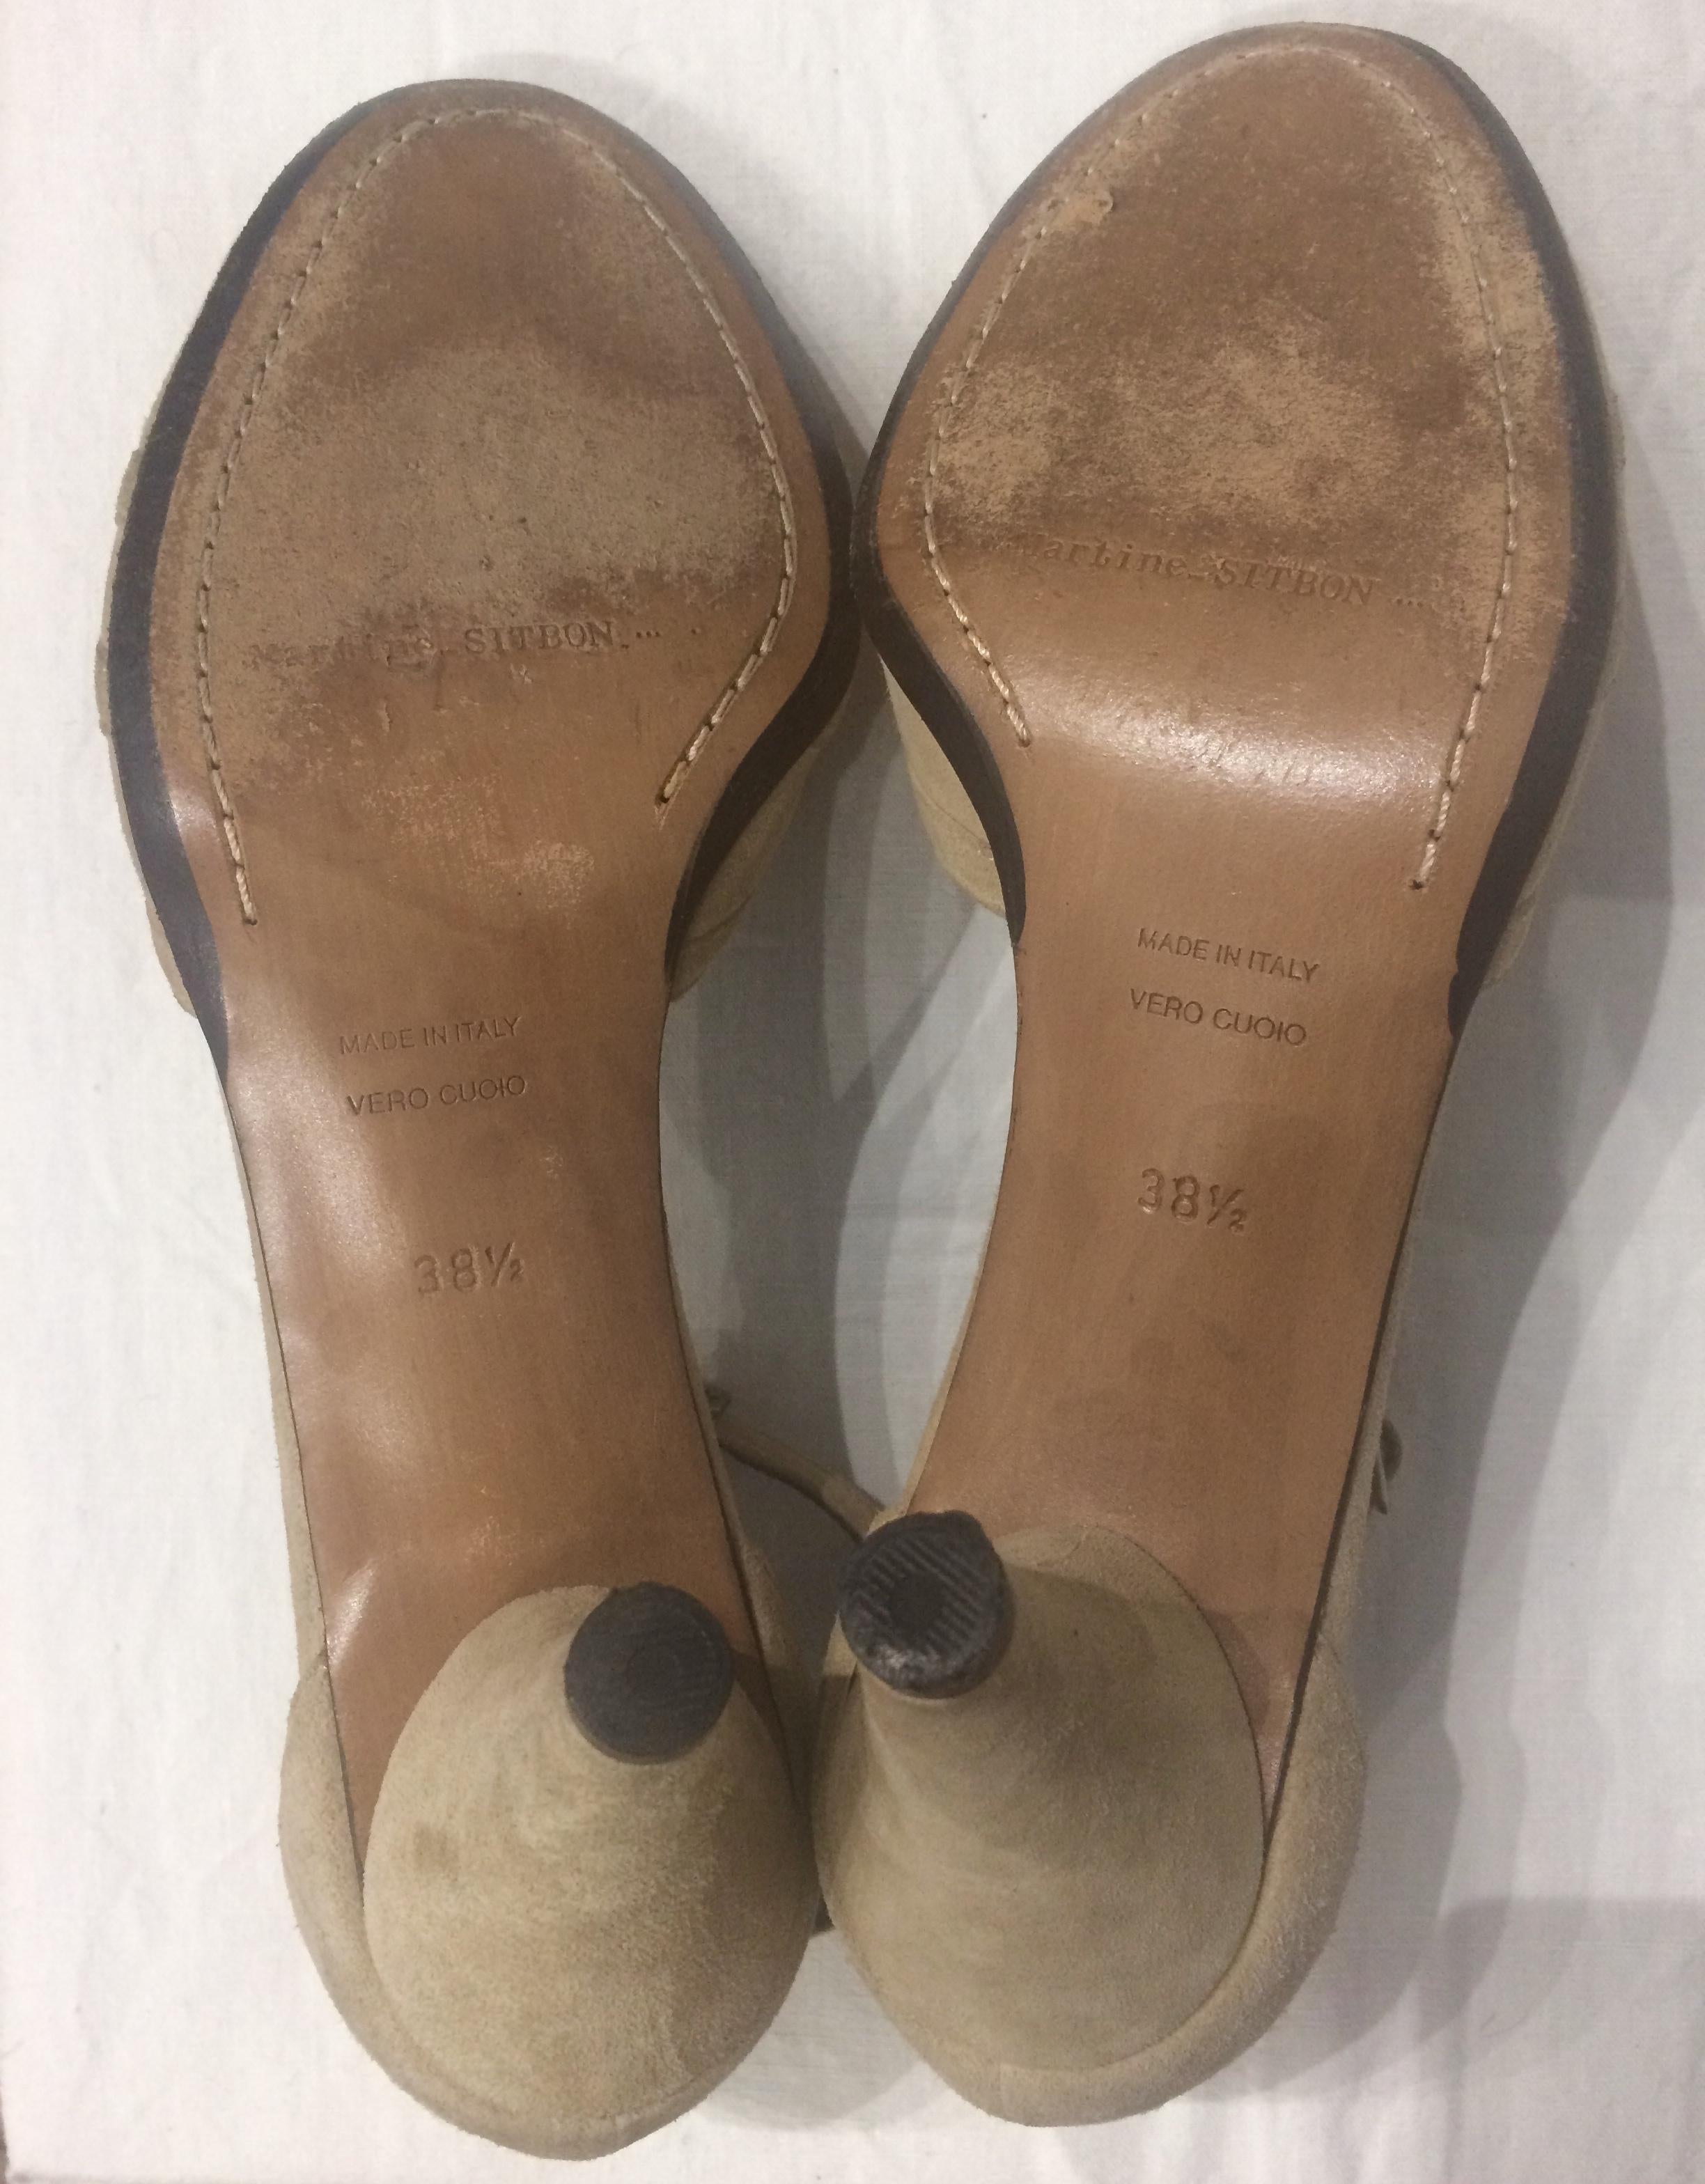 Camel leather suede Martine Sitbon escarpins featuring a 8cm heels. Noted size 38.5 fr but should be more as a 39fr.
In good vintage condition. 
Estimated size 39fr
We guarantee you will receive this  iconic item as described and showed on